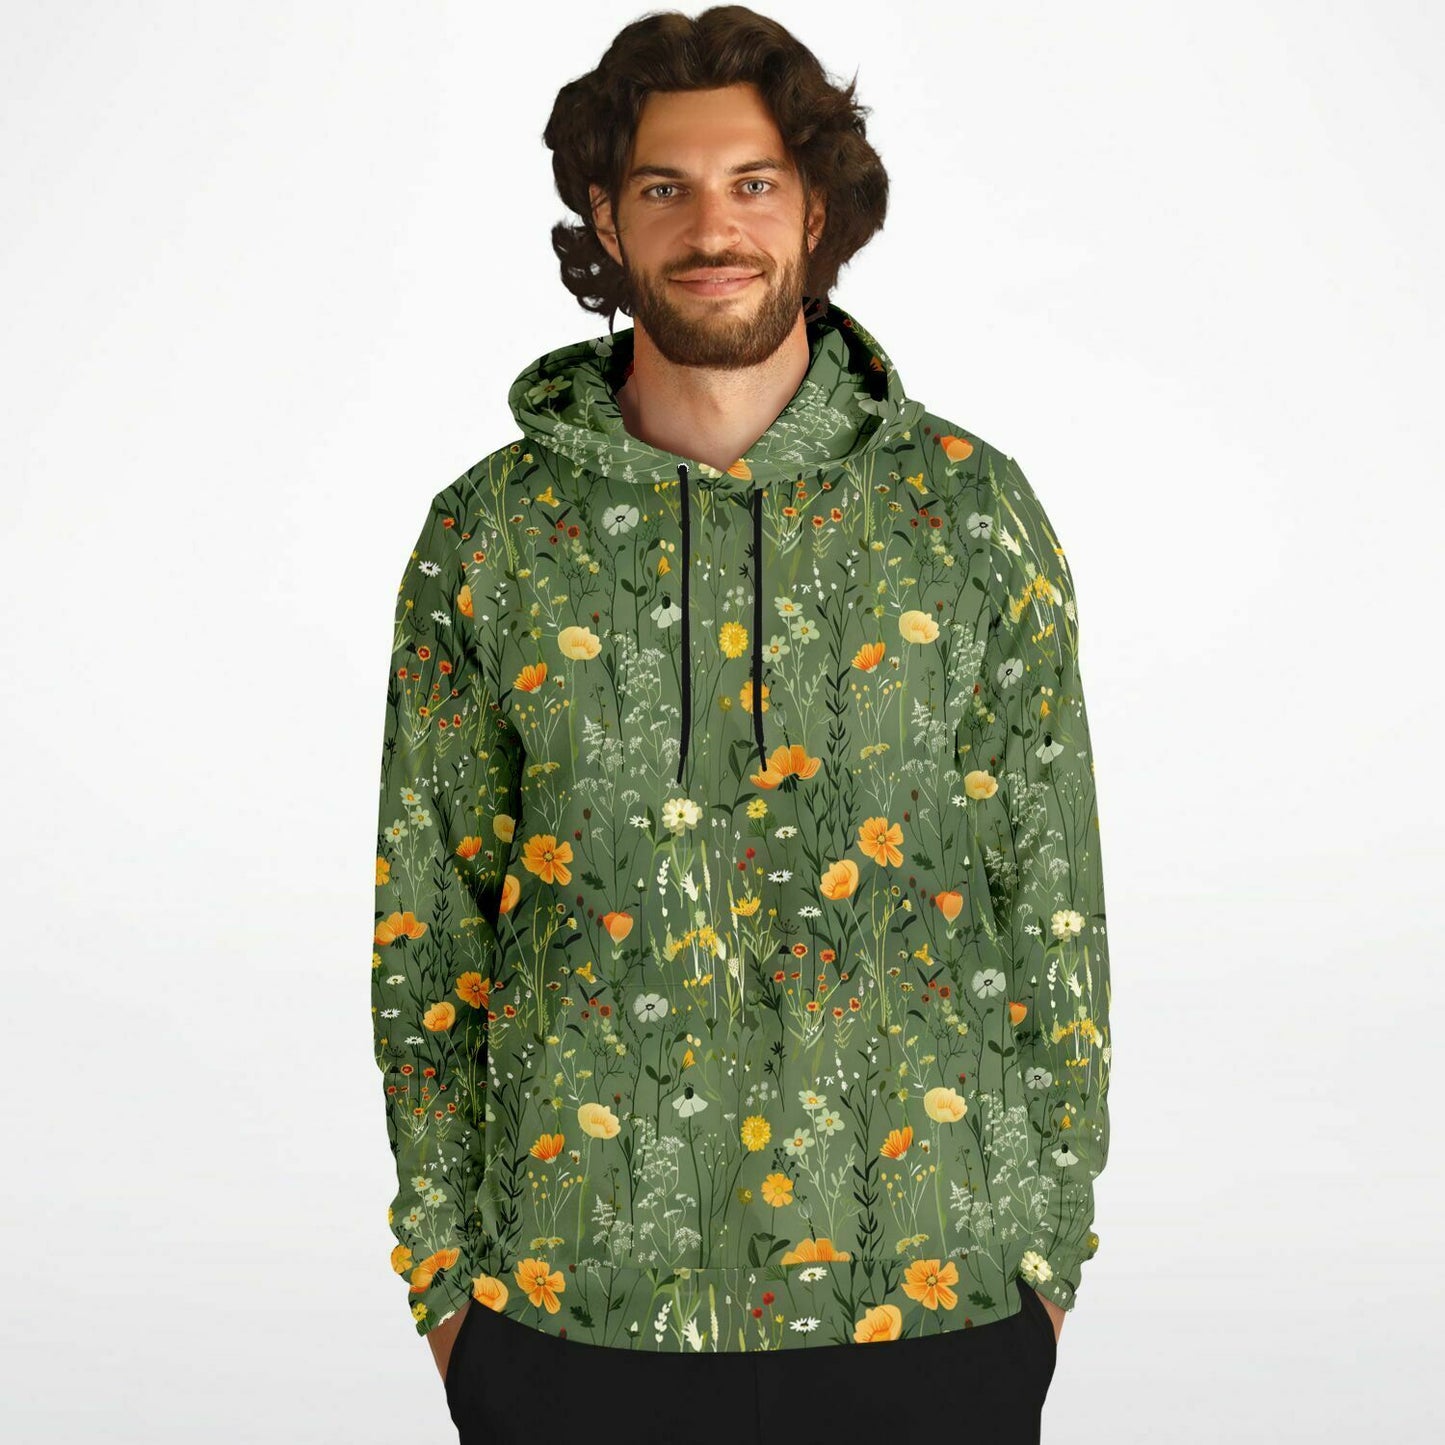 Wildflowers Green Hoodie, Olive Floral Flowers Pullover Men Women Adult Aesthetic Graphic Cotton Hooded Sweatshirt with Pockets